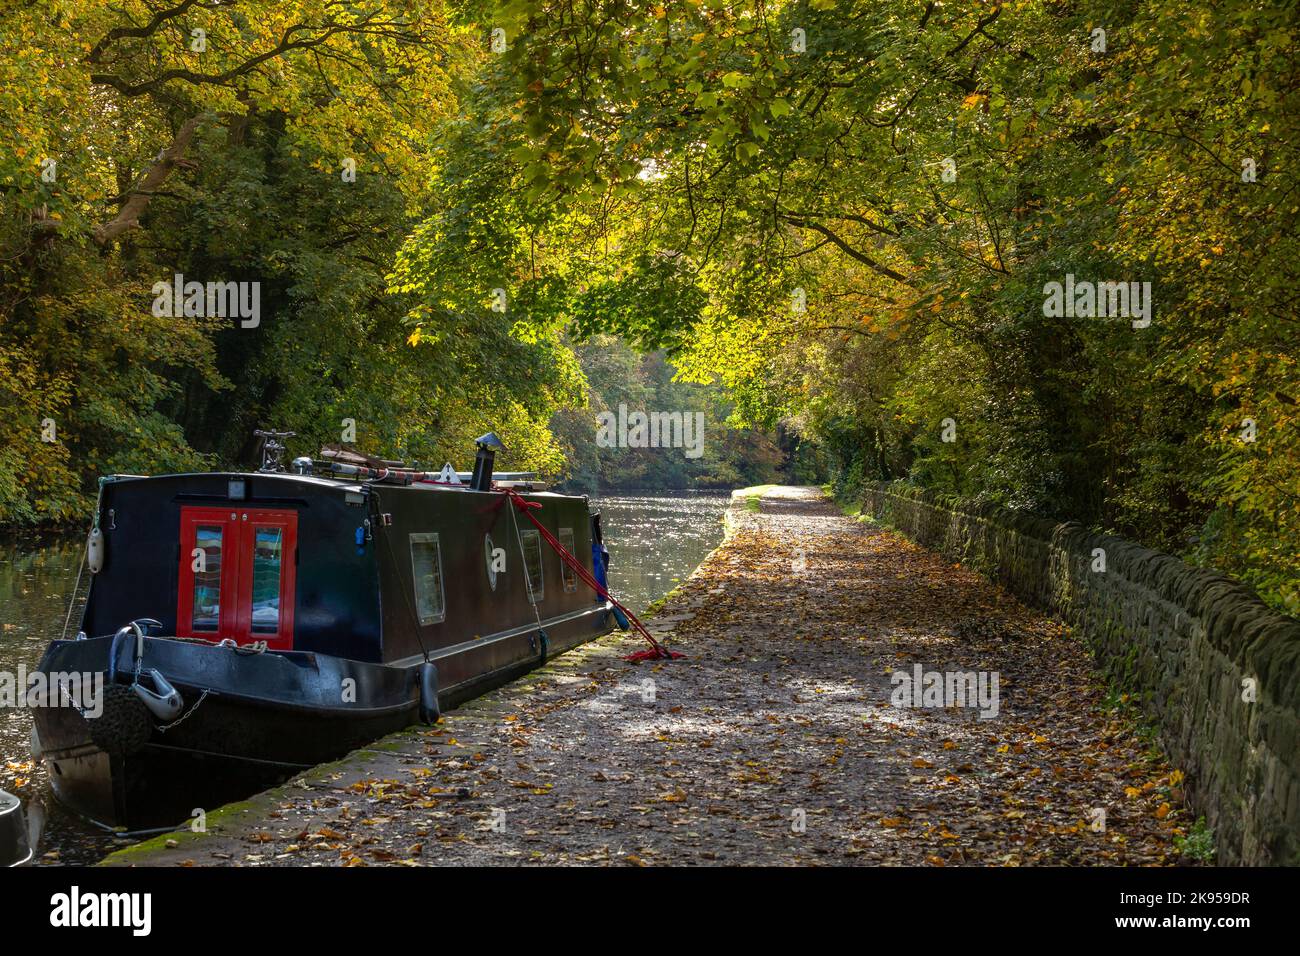 A barge (narrowboat, flat bottomed boat) is moored up at the side of the Leeds Liverpool canal in Bingley, Yorkshire in Autumn. Stock Photo